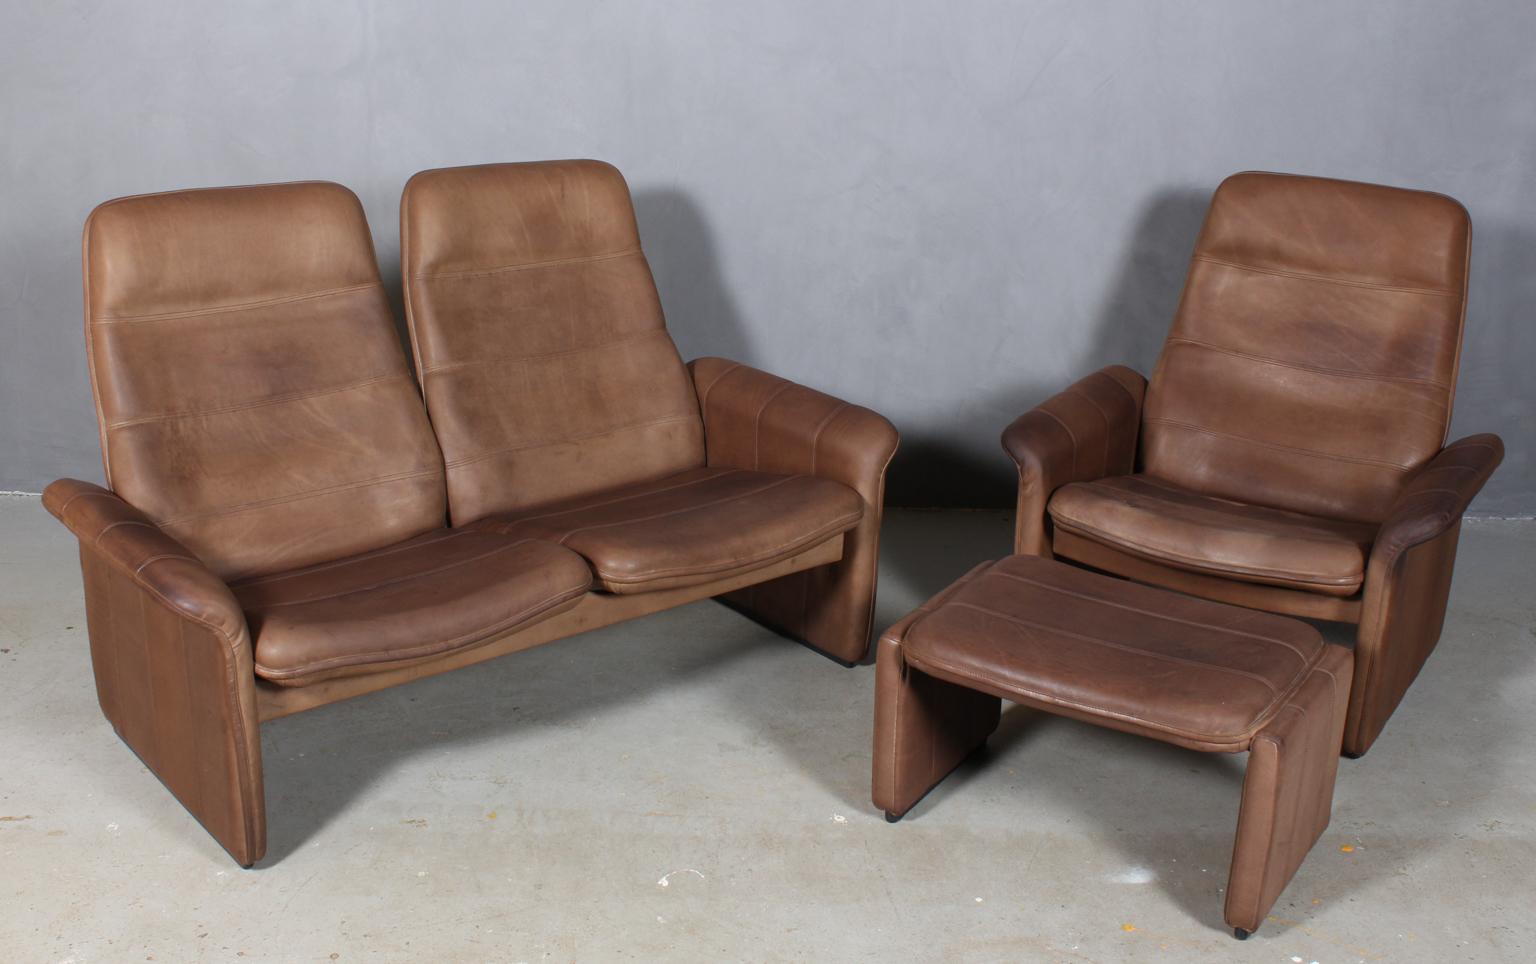 Vintage De Sede Exclusive, sofa set with two-seat sofa and lounge chair with ottoman. Lounge chair with adjustable back.
 
The high quality leather is in very good condition and with wonderful patina.

De Sede once started as a saddler's